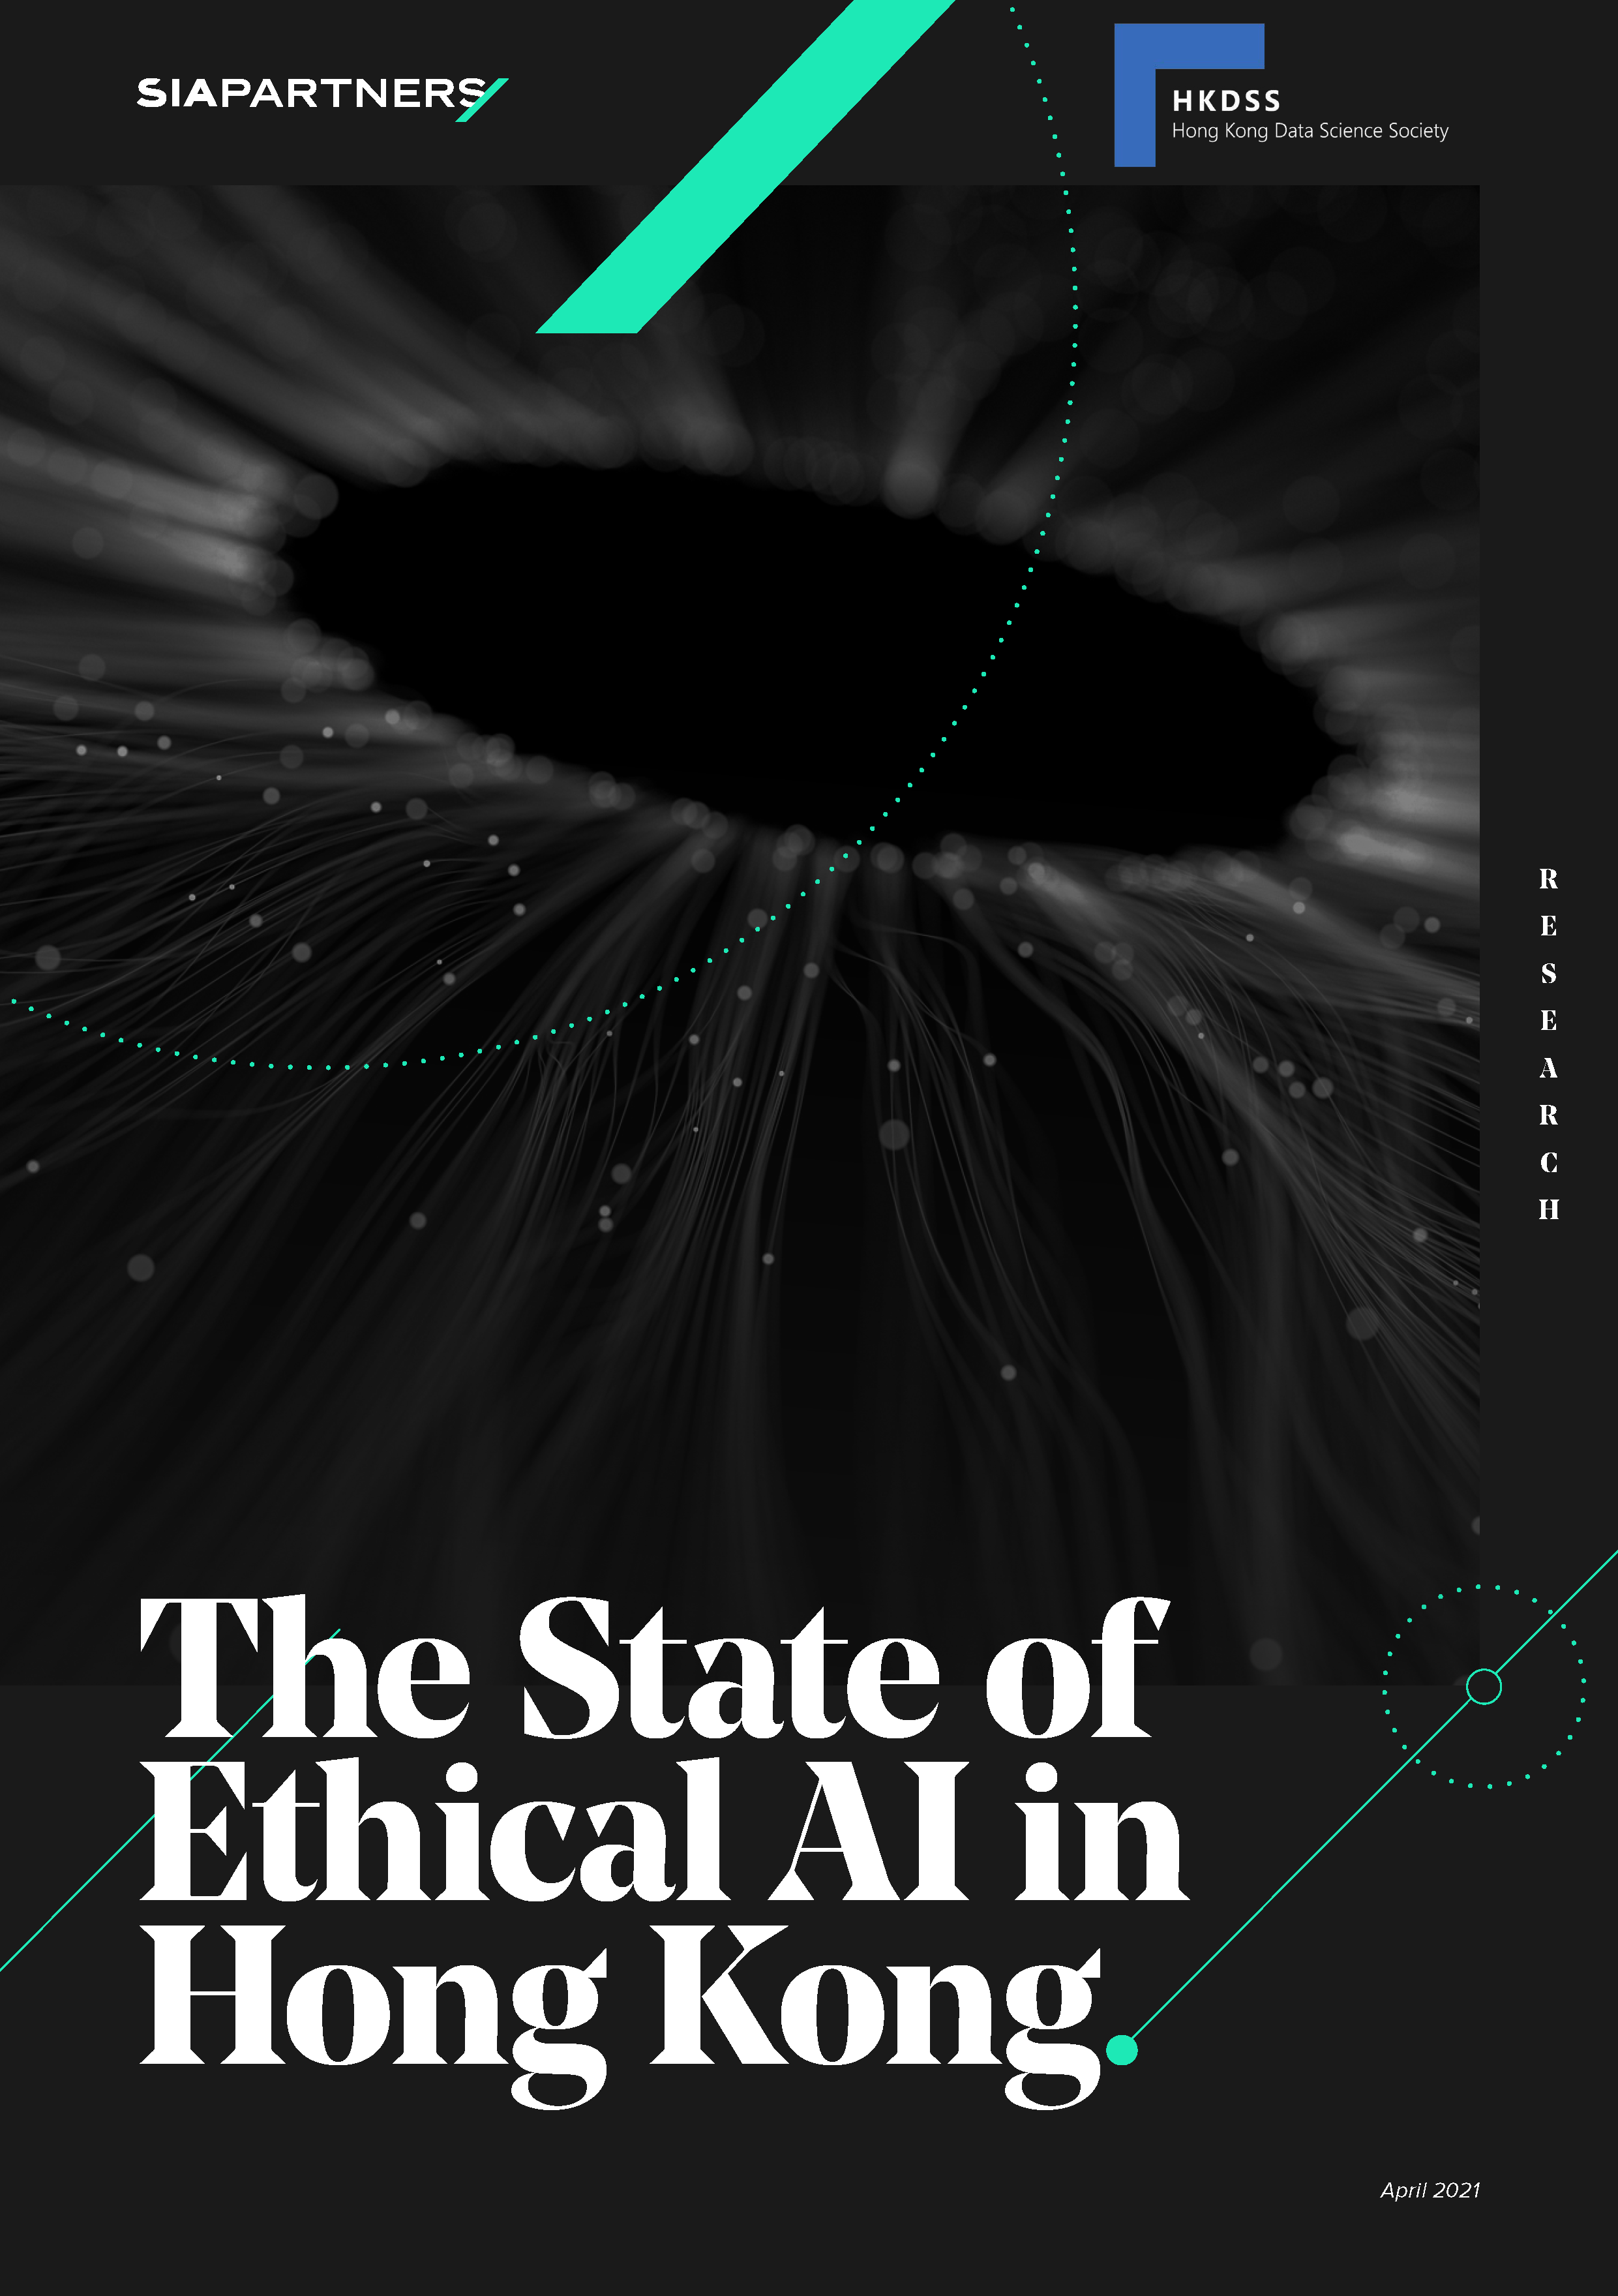 The State of Ethical AI in Hong Kong